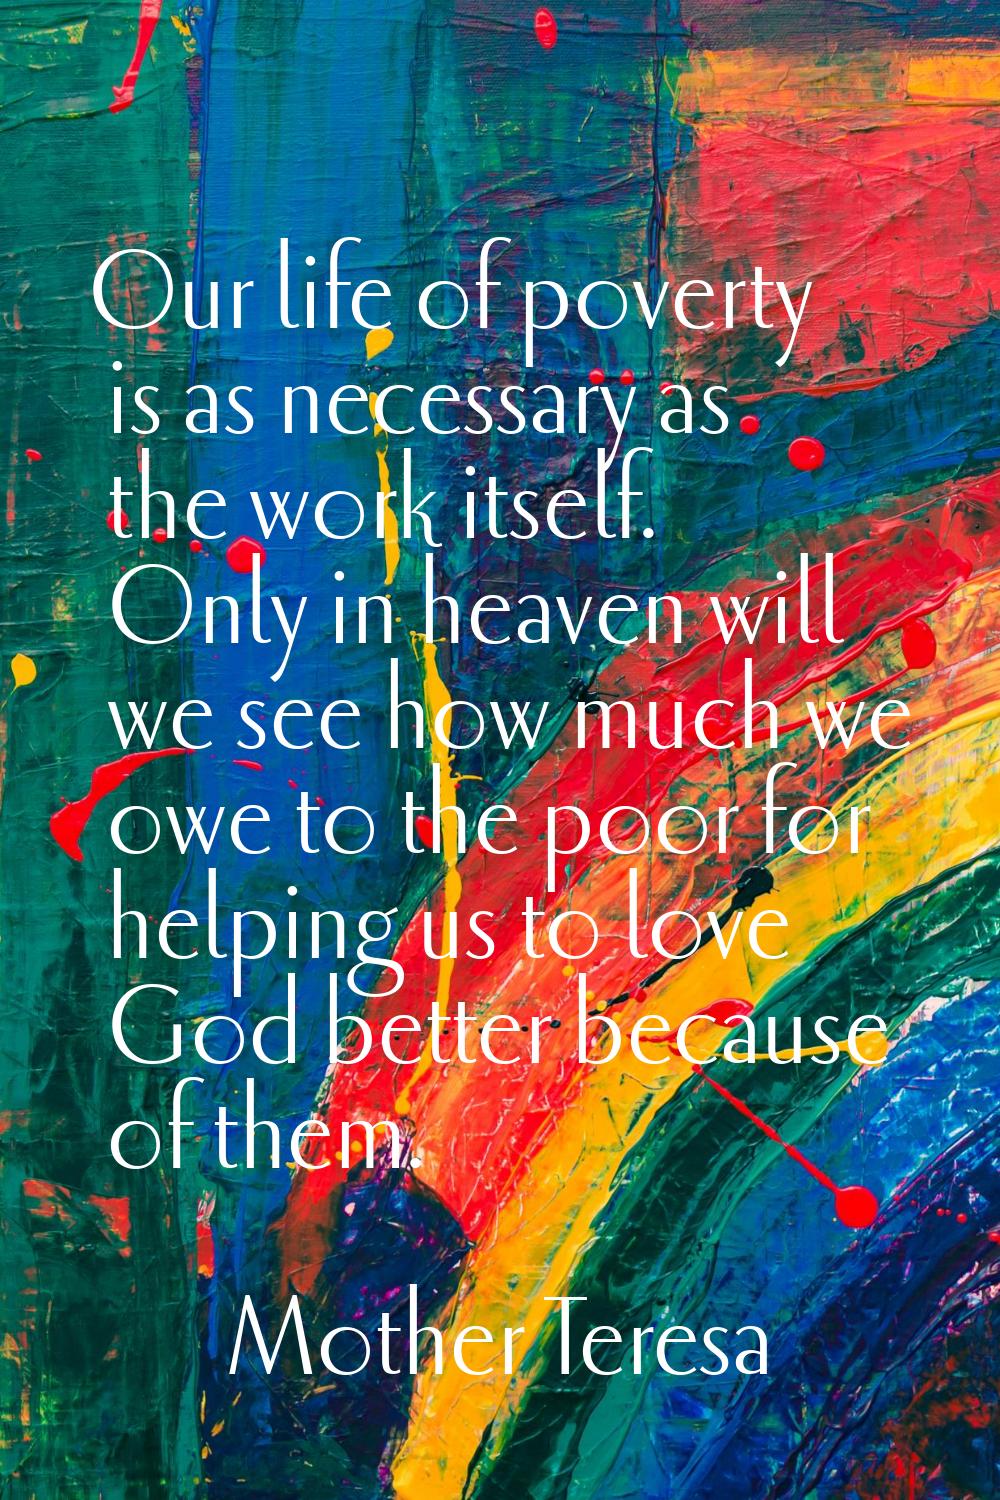 Our life of poverty is as necessary as the work itself. Only in heaven will we see how much we owe 